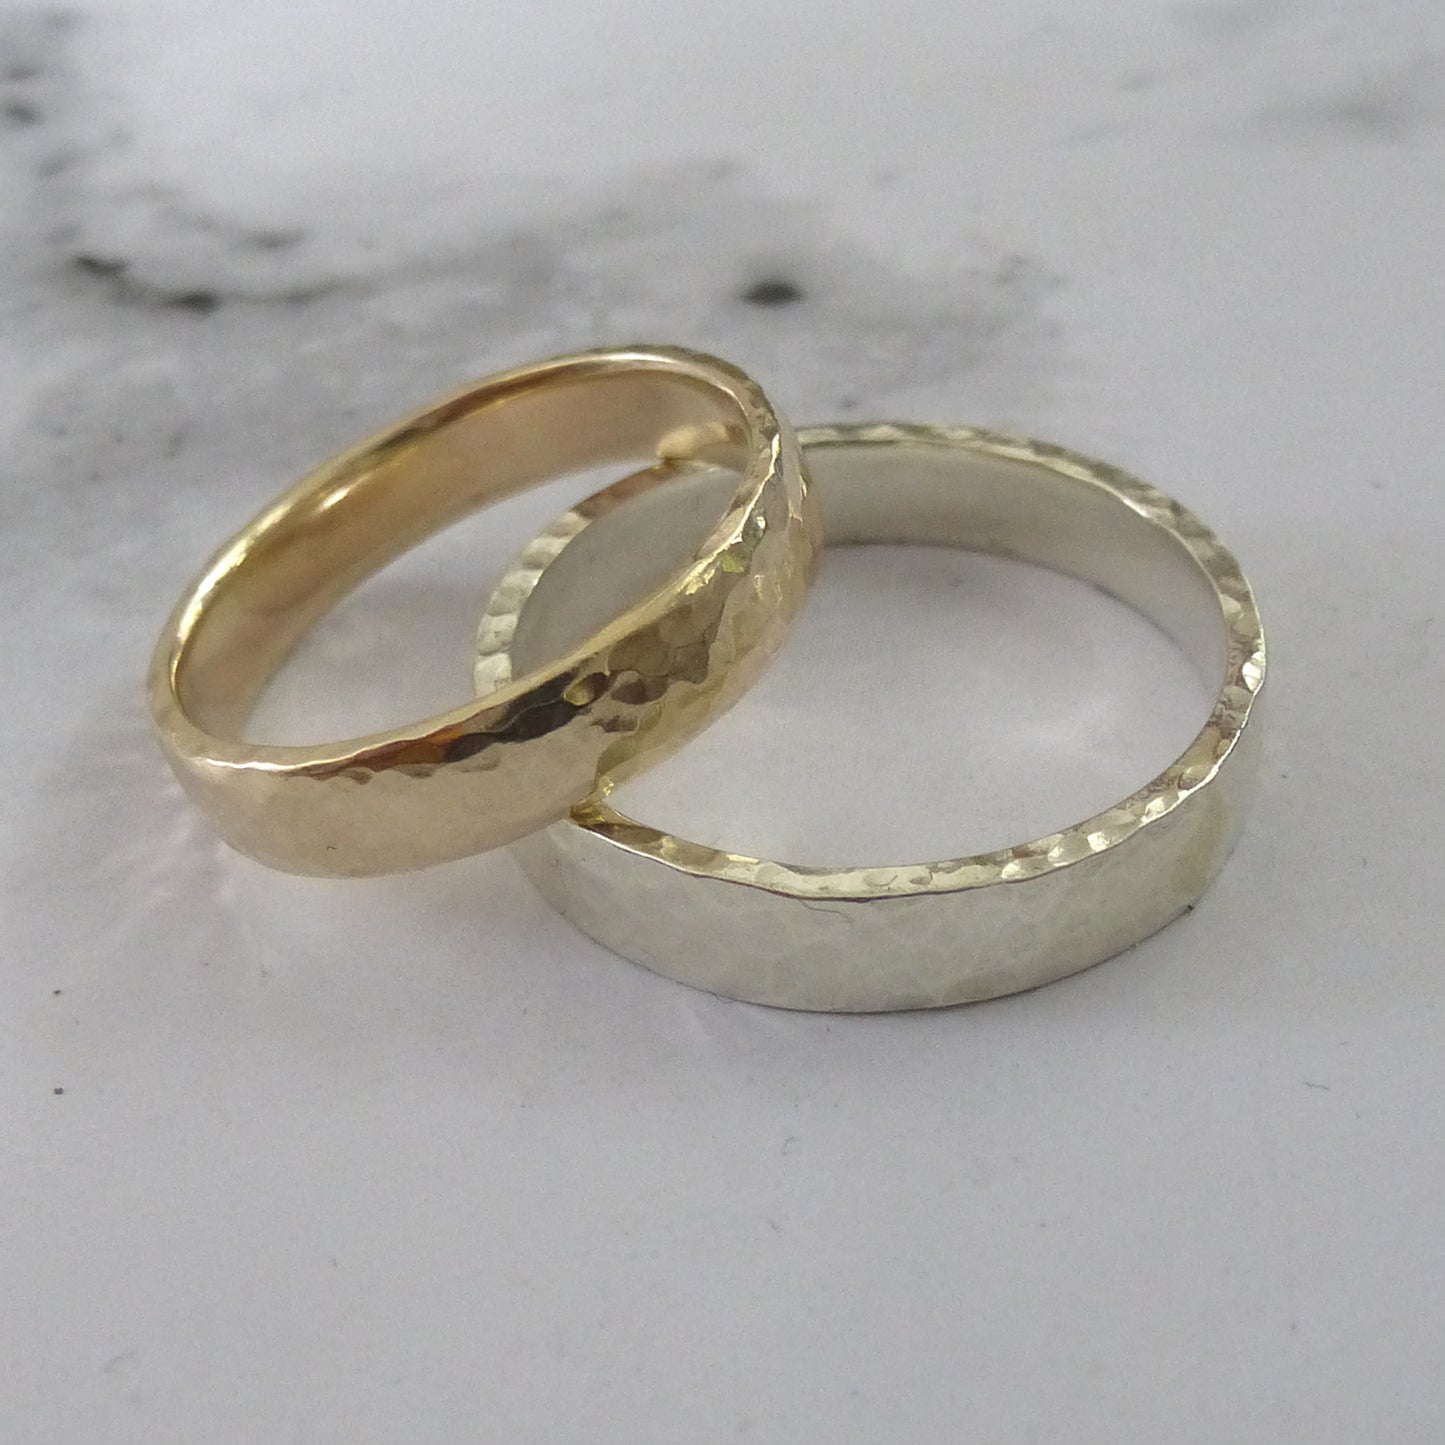 A pair of wedding band, 9ct gold, one a soft modern court, one with squarer edges